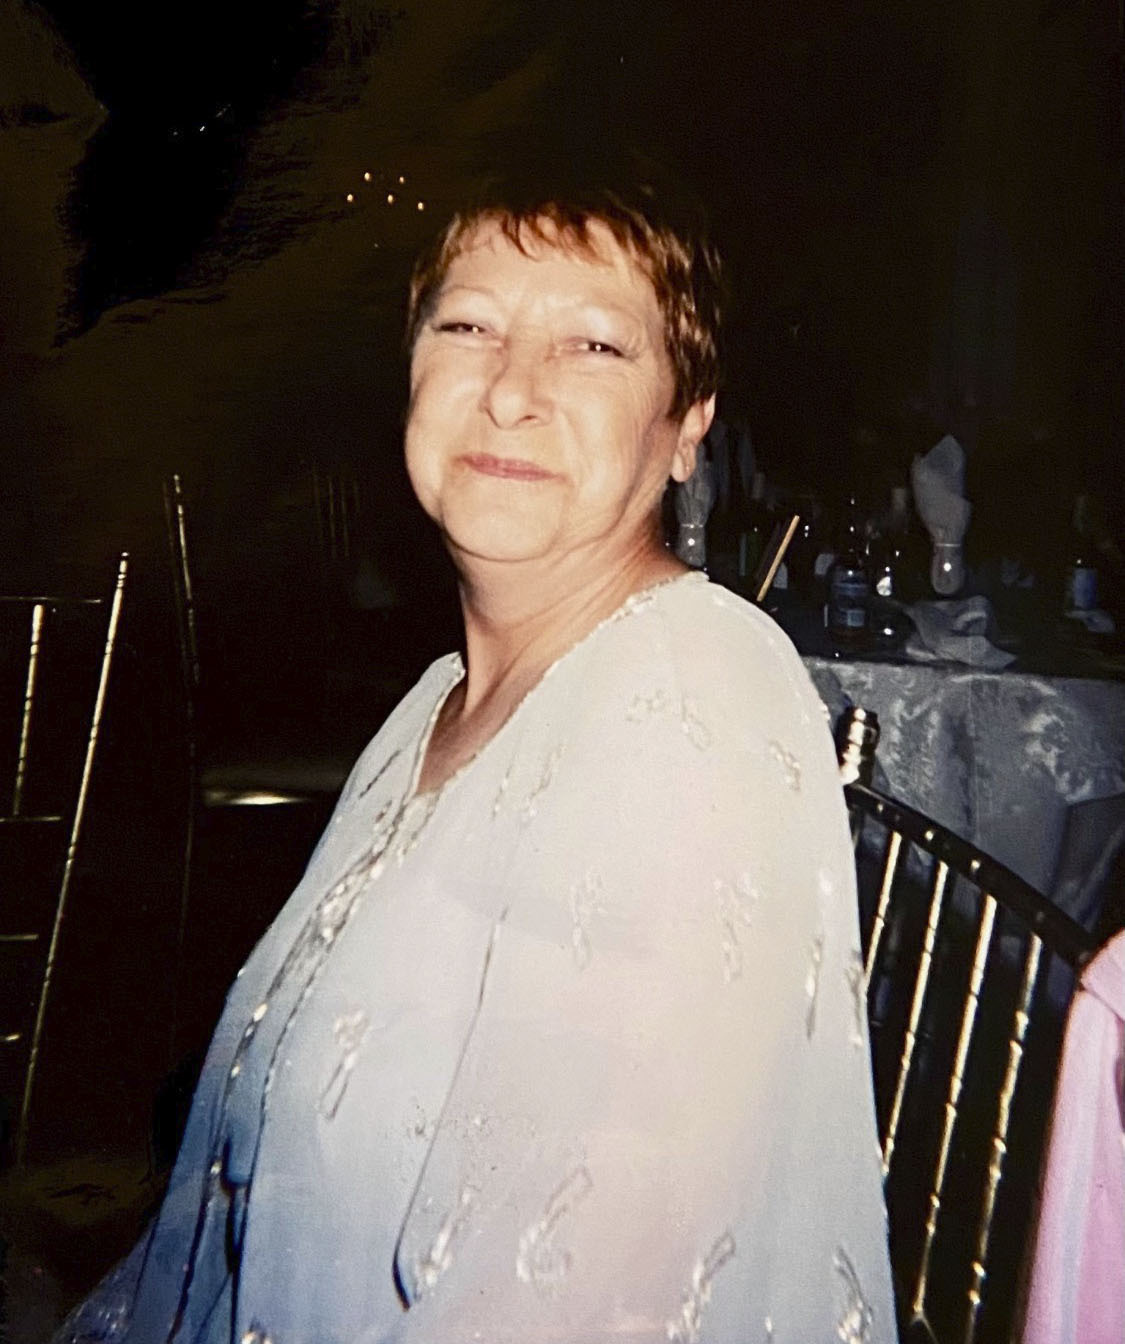 Manorville resident Margaret Parr, who died on March 1 of 2013, as a result of complications from ambulatory hernia surgery. A jury recently awarded more than $2 million to her family in a medical malpractice case against Southampton-based surgeon Dr. Medhat Allam.